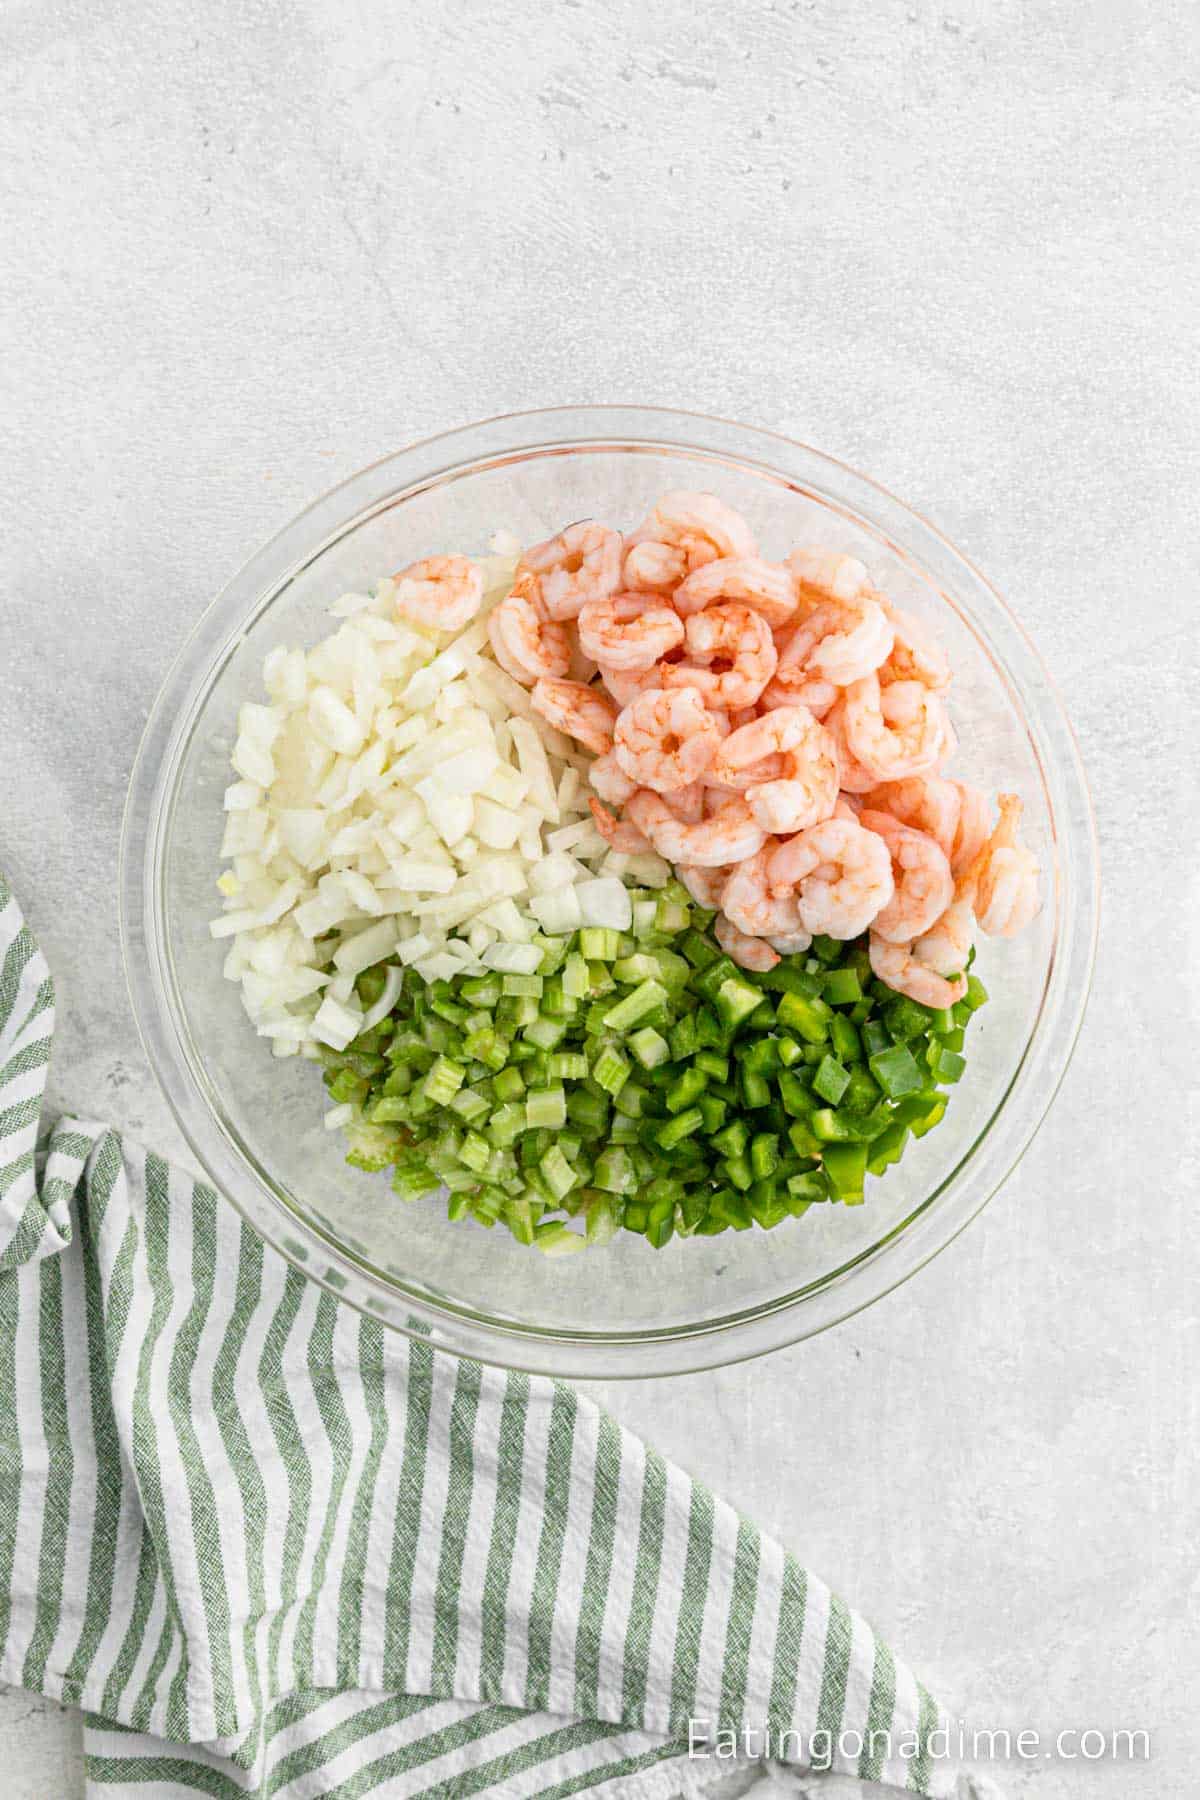 Chopped onions, cooked shrimp, chopped celery, and chopped green bell peppers in a bowl